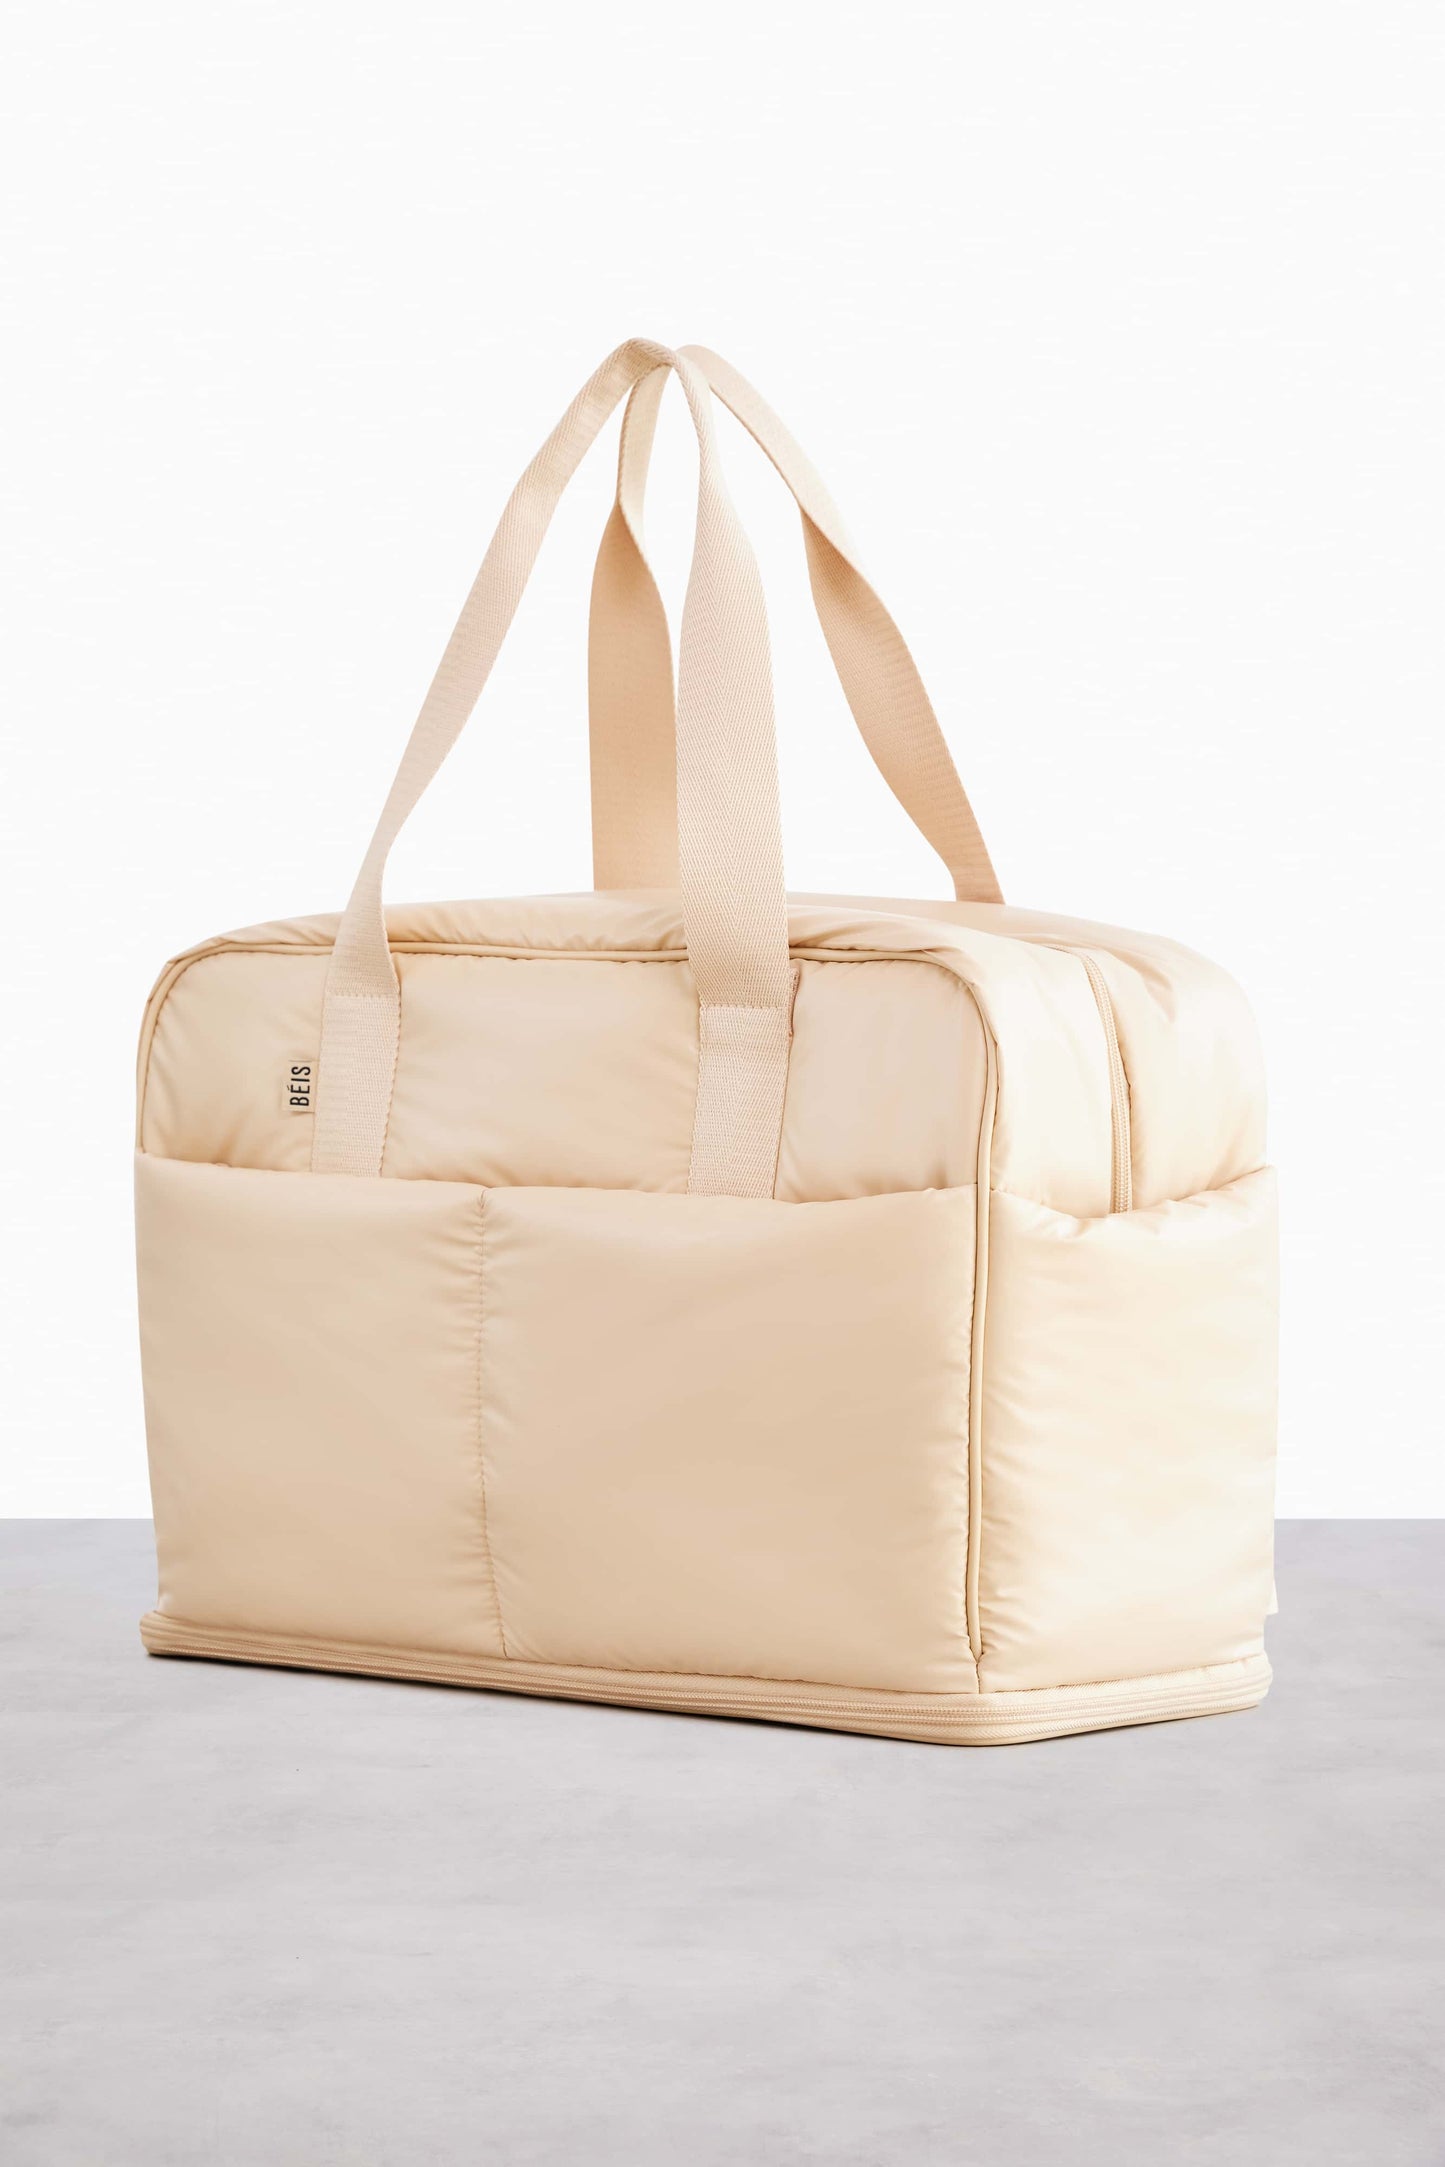 The Expandable Duffle in Beige